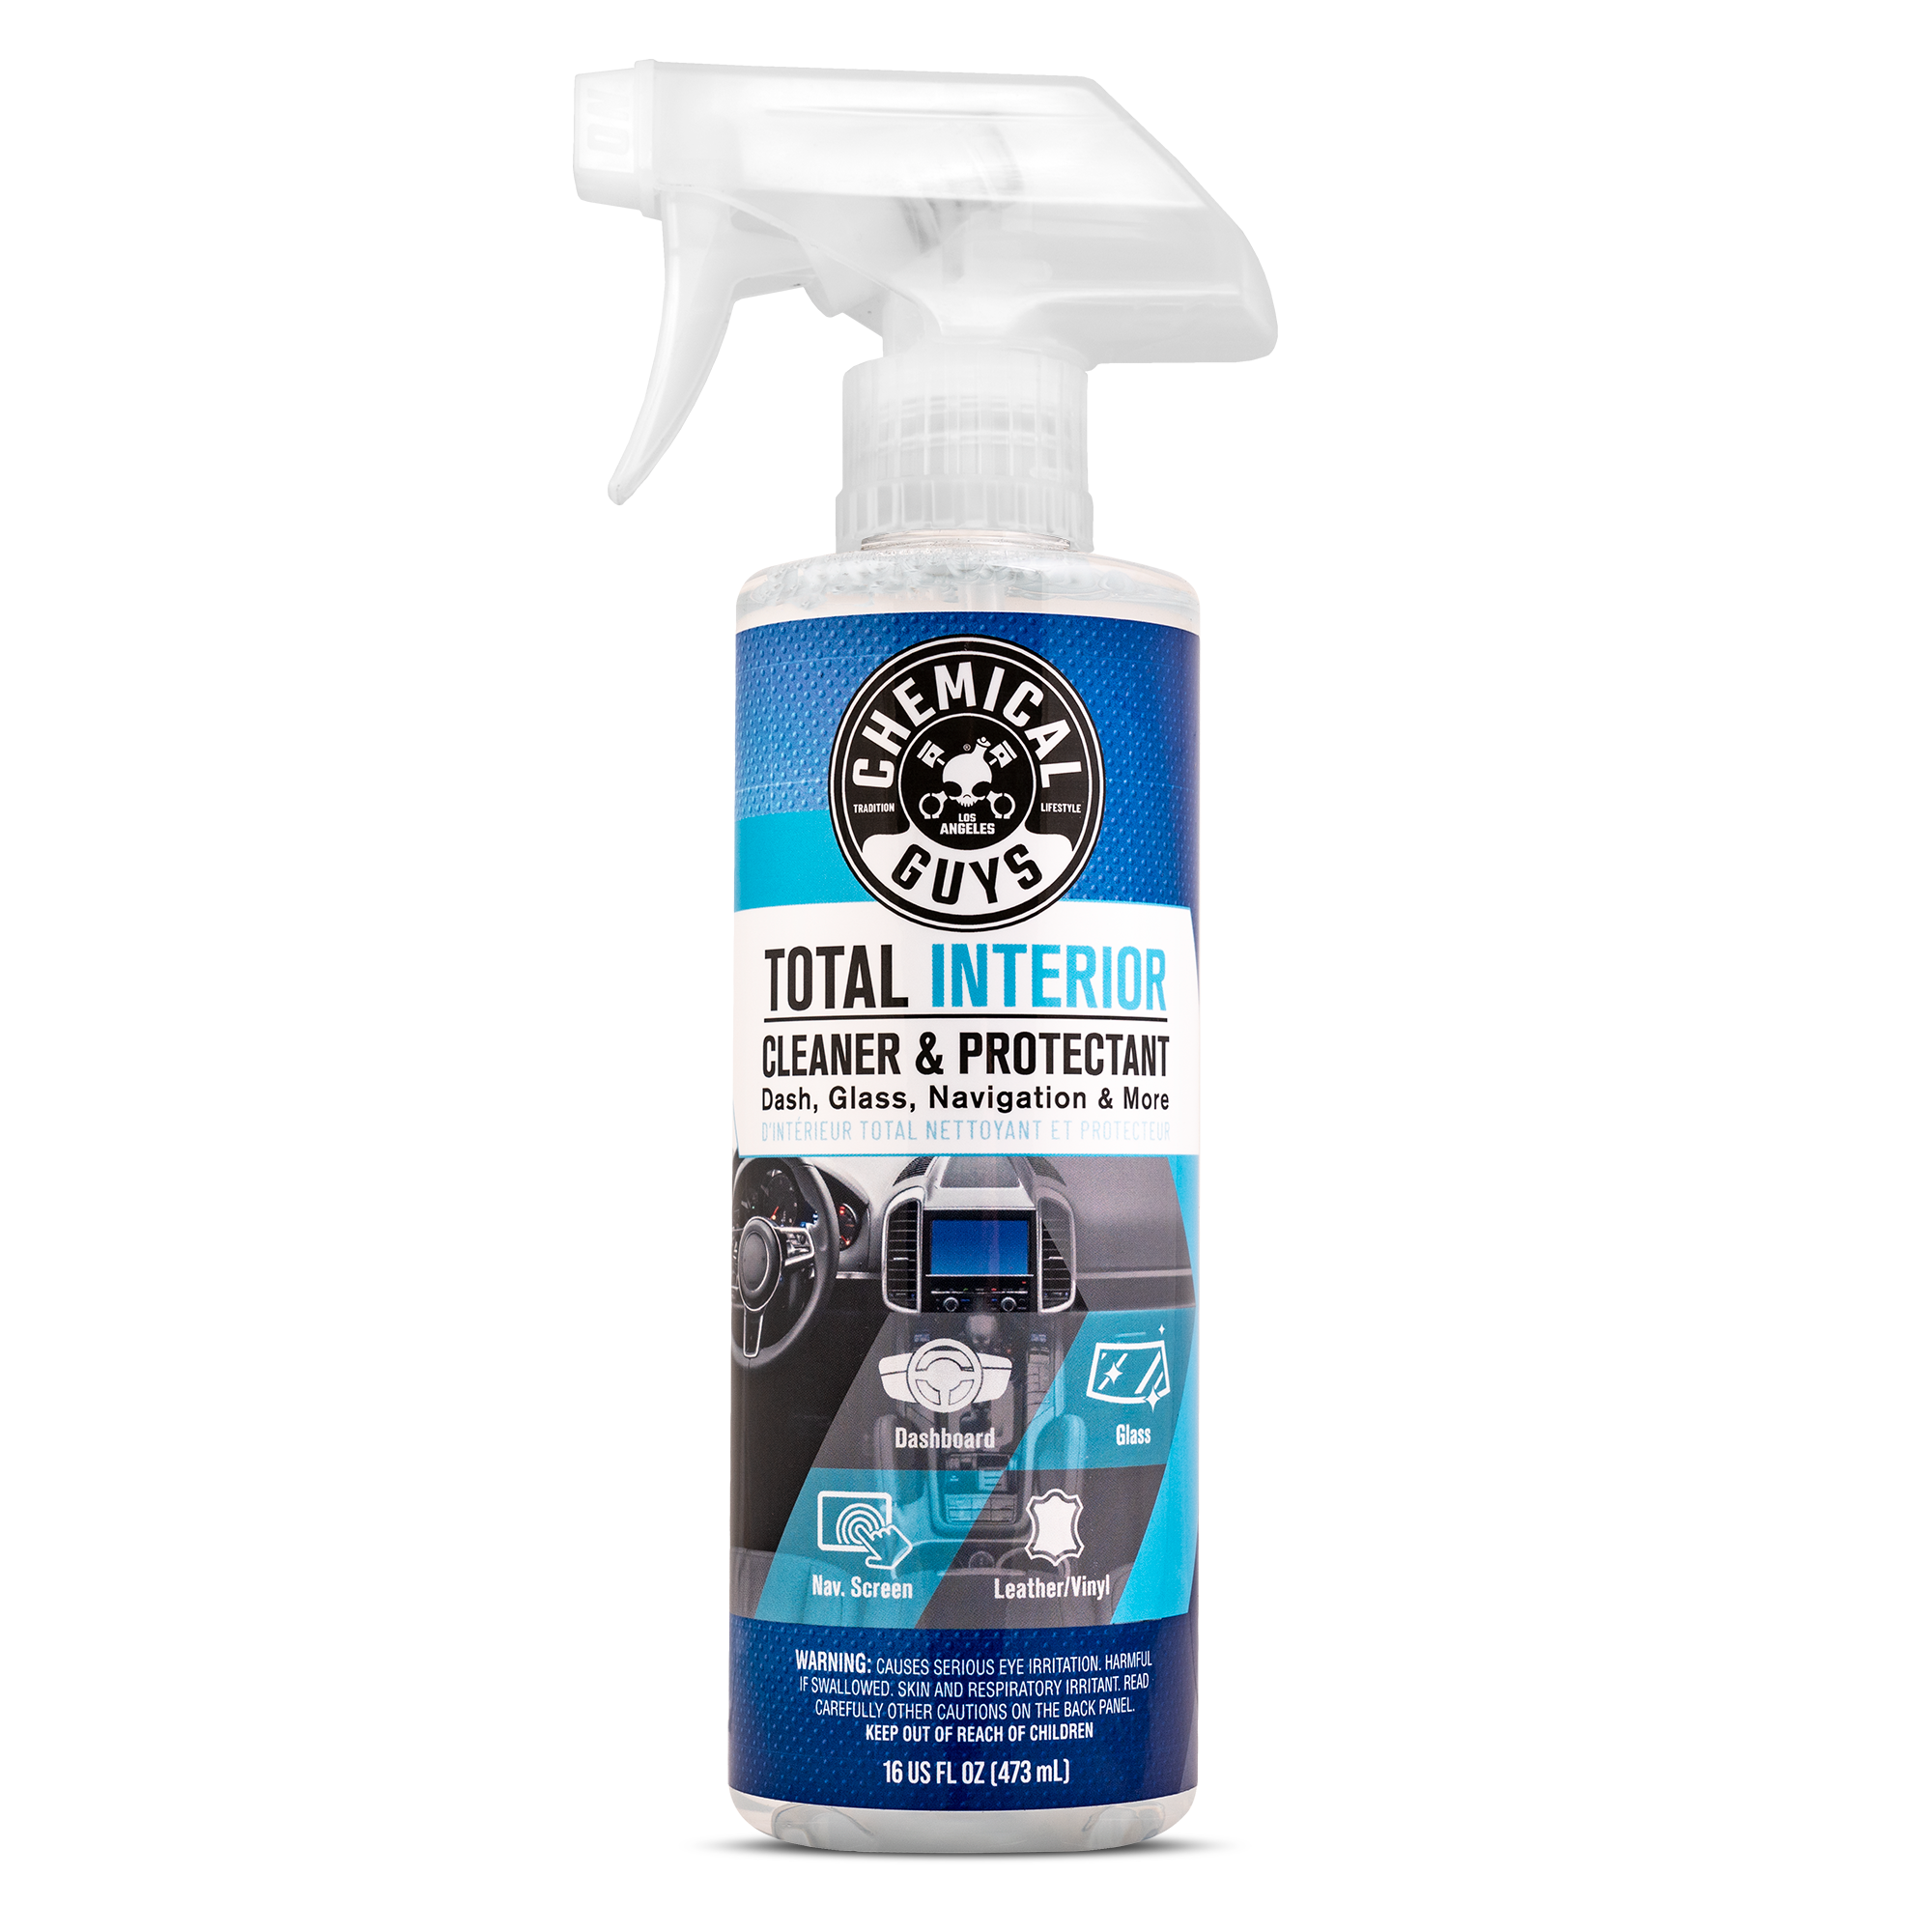 Car Cleaner Inside Car Cleaner Spray Carpet And Upholstery Stain Extractor  Fabric Upholstery & Carpet Safe For Cars Home Office